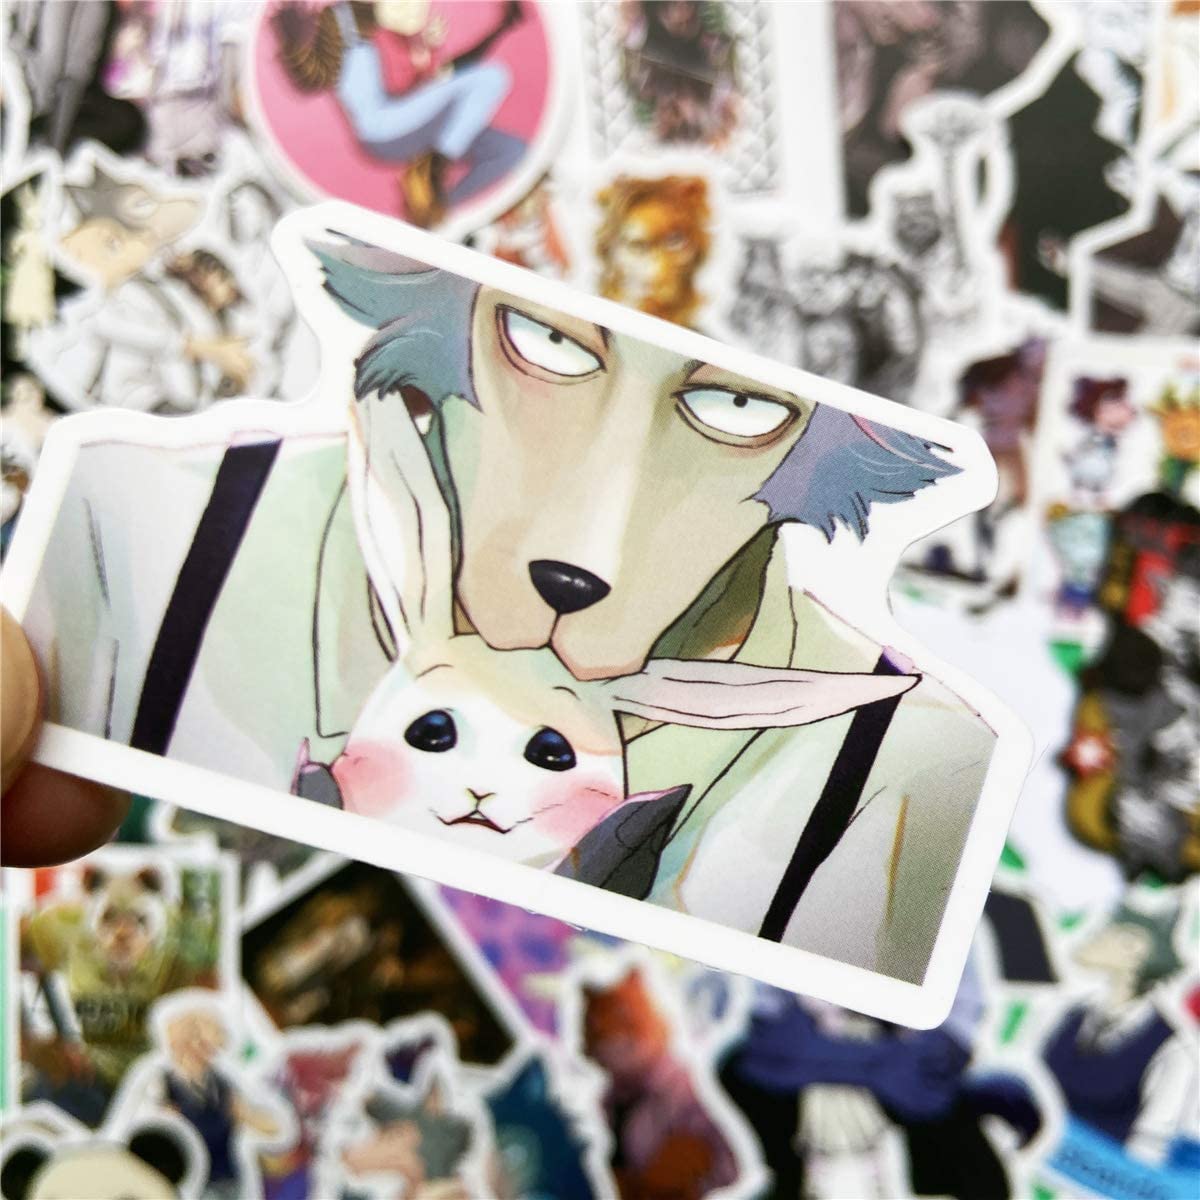 50pcs Beastars Anime Stickers for Laptop Luggage Snowboard Bicycle Decal for Kids Teens Adult Waterproof Aesthetic Stickers